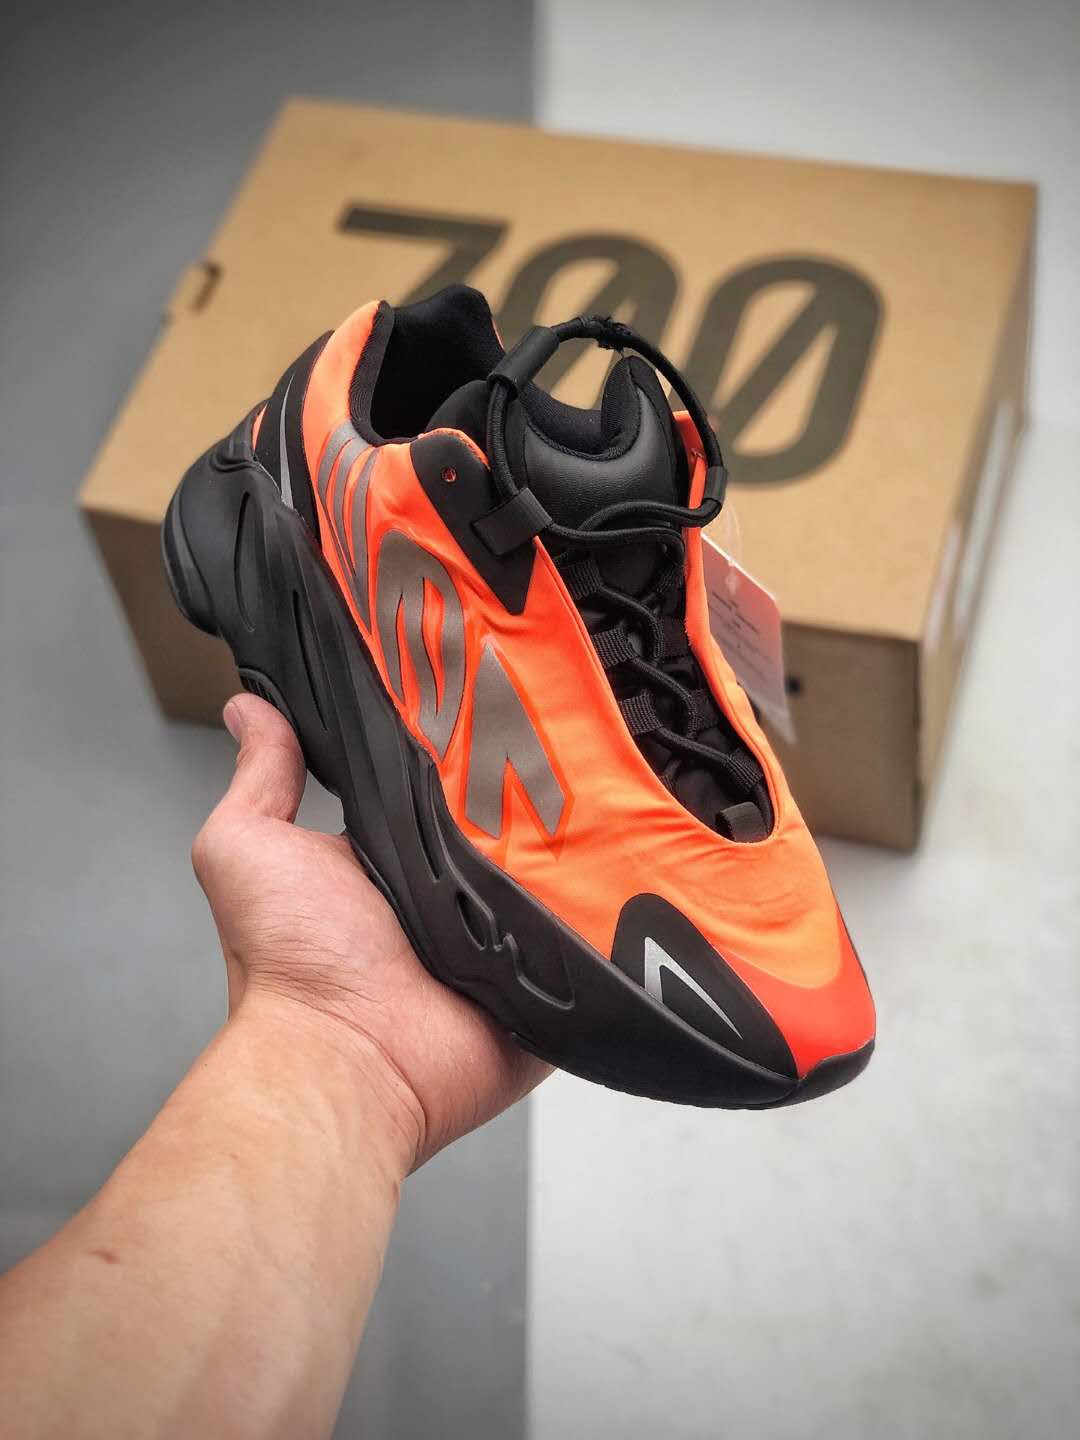 Adidas Yeezy Boost 700 MNVN 'Orange' FV3258 - Bold and Vibrant Sneakers